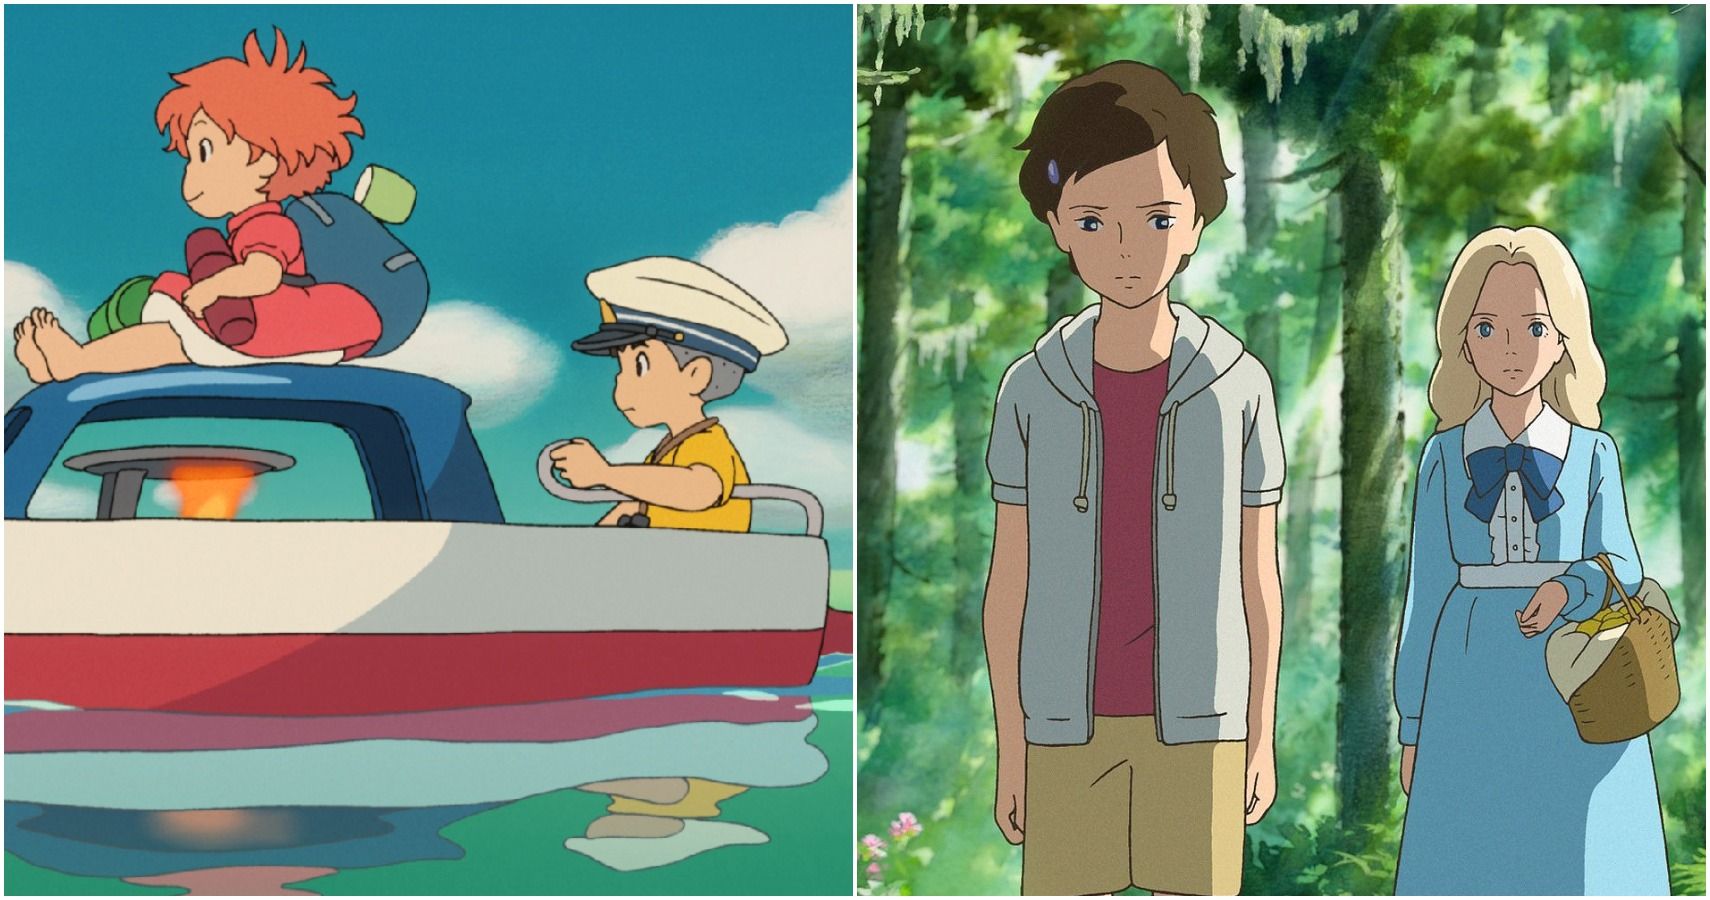 The Best & Worst Studio Ghibli Films (According to Rotten Tomatoes